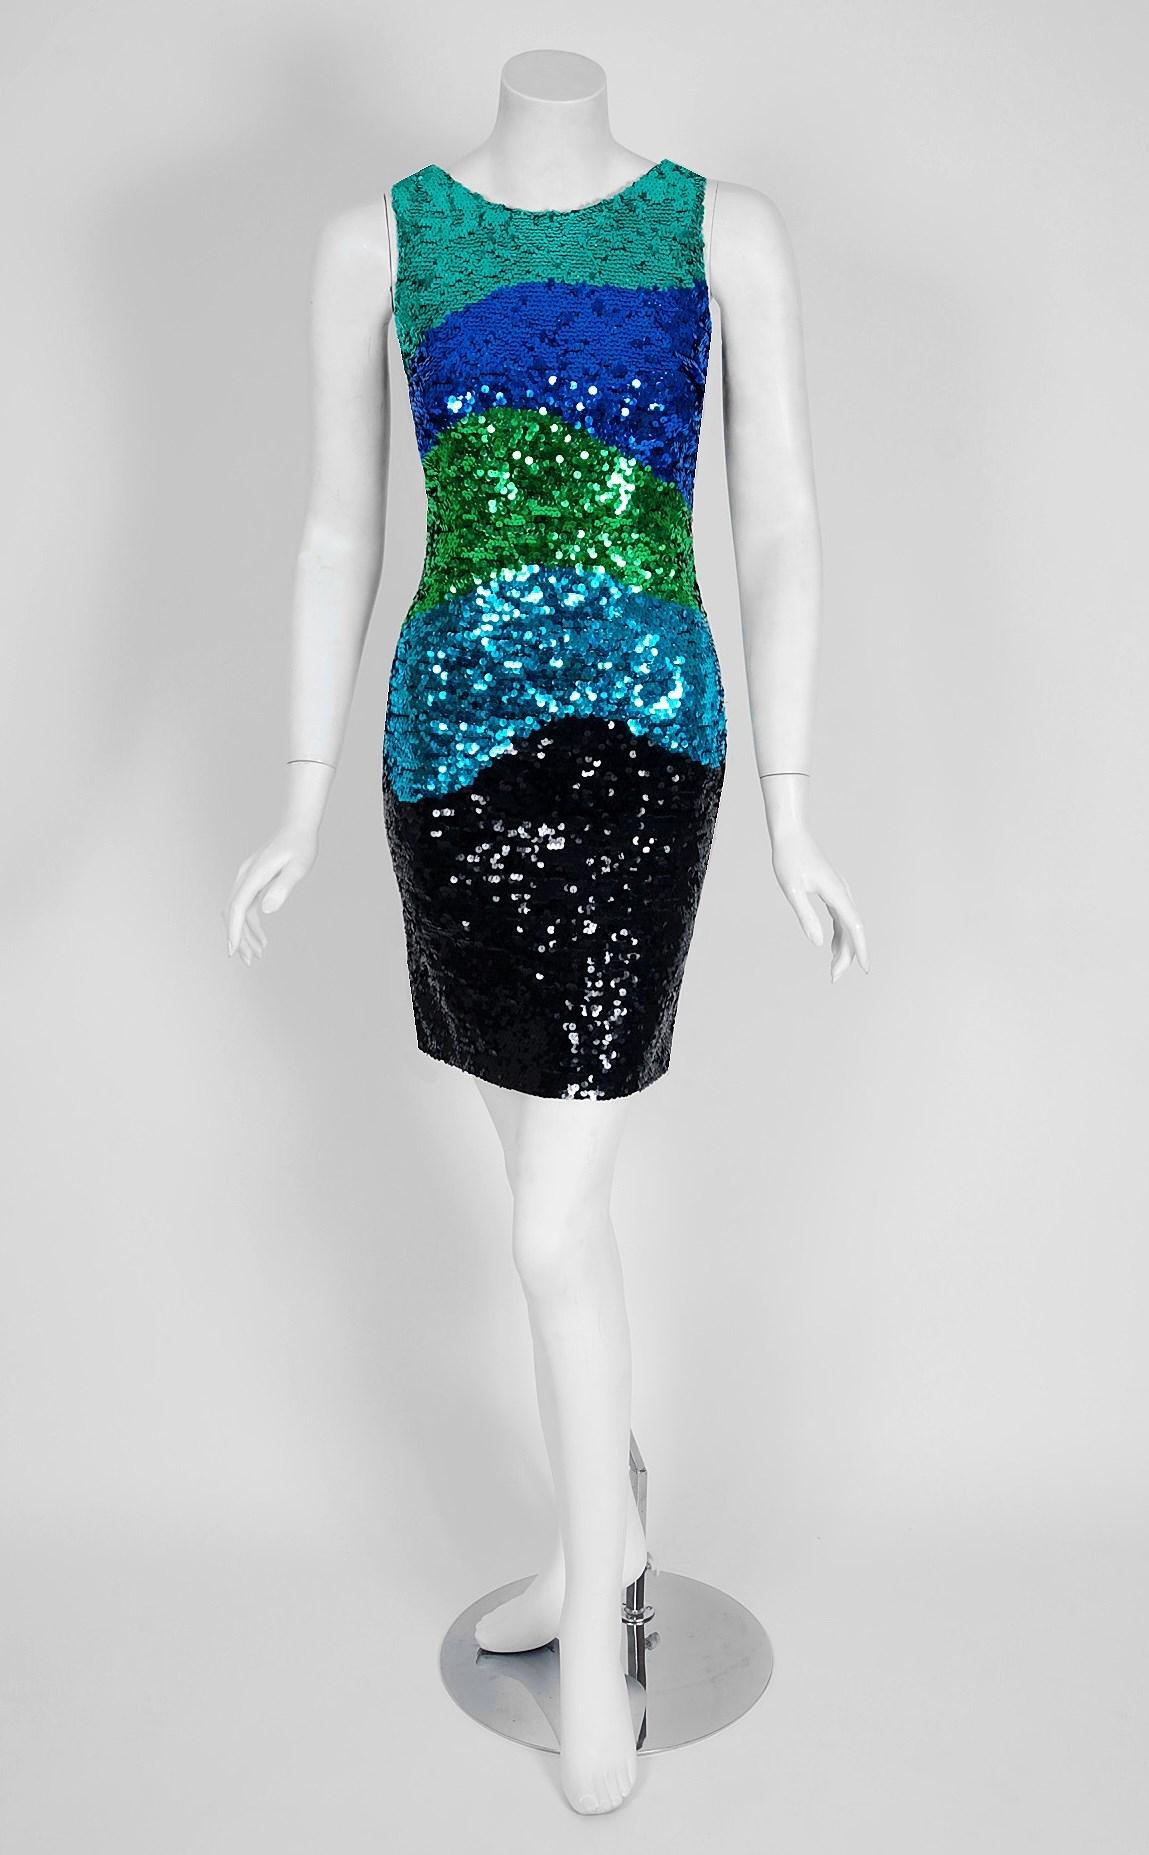 This seductive mid-1990's Bergdorf Goodman bodycon dress has a fantastic ombre gradient design worked in which is guaranteed to light up any room. The base is an ultra-soft stretch knit. I love the sleeveless low backside bodice. The narrowing